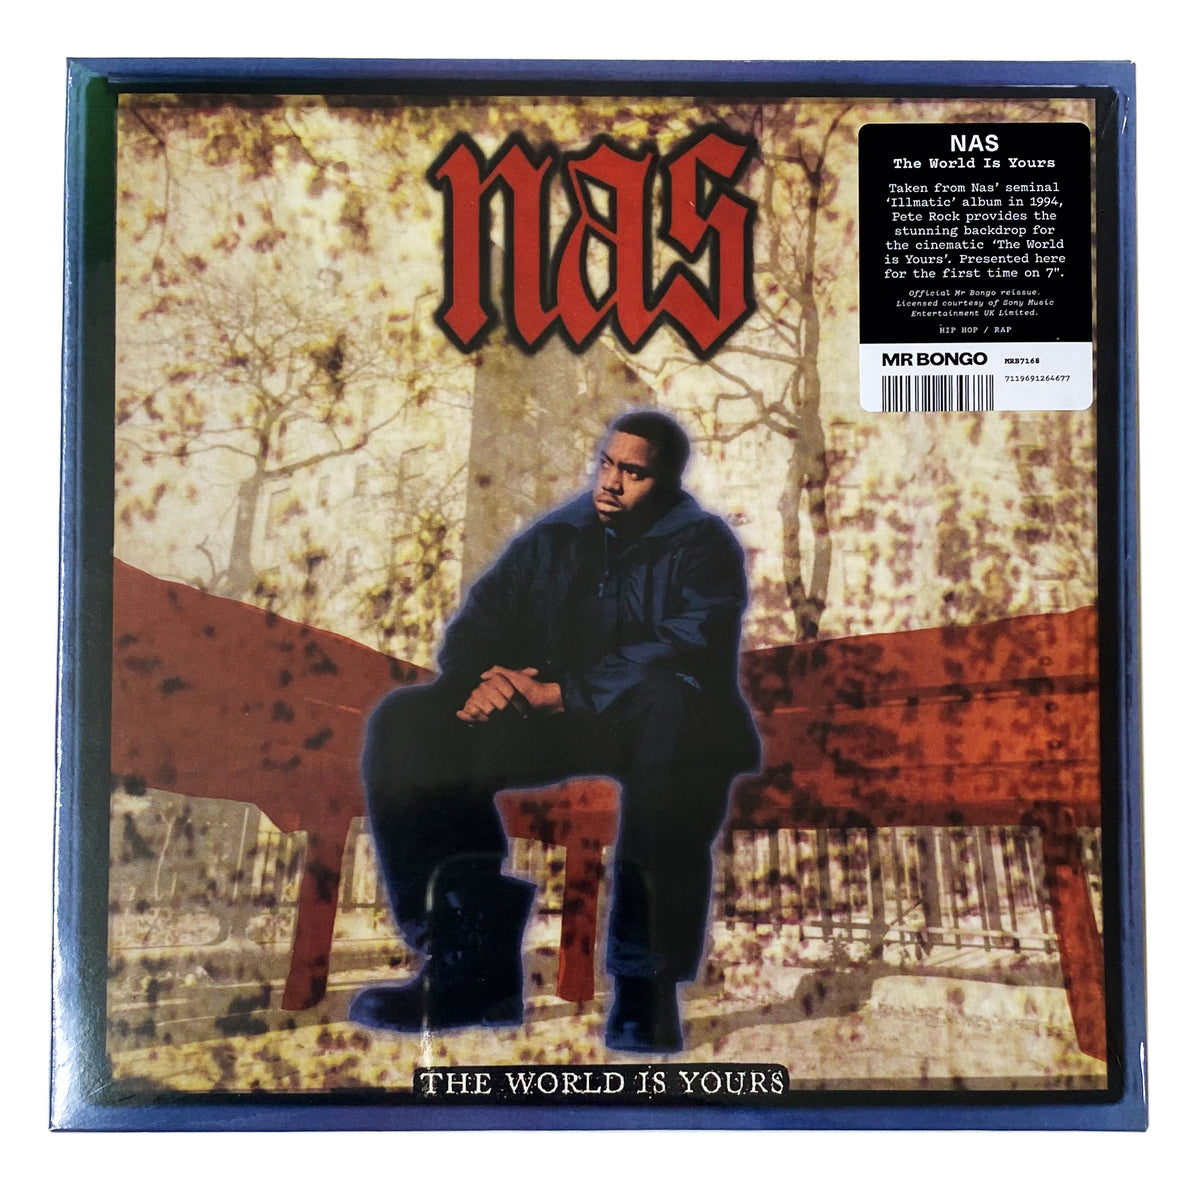 The World Is Yours (Nas song) - Wikipedia